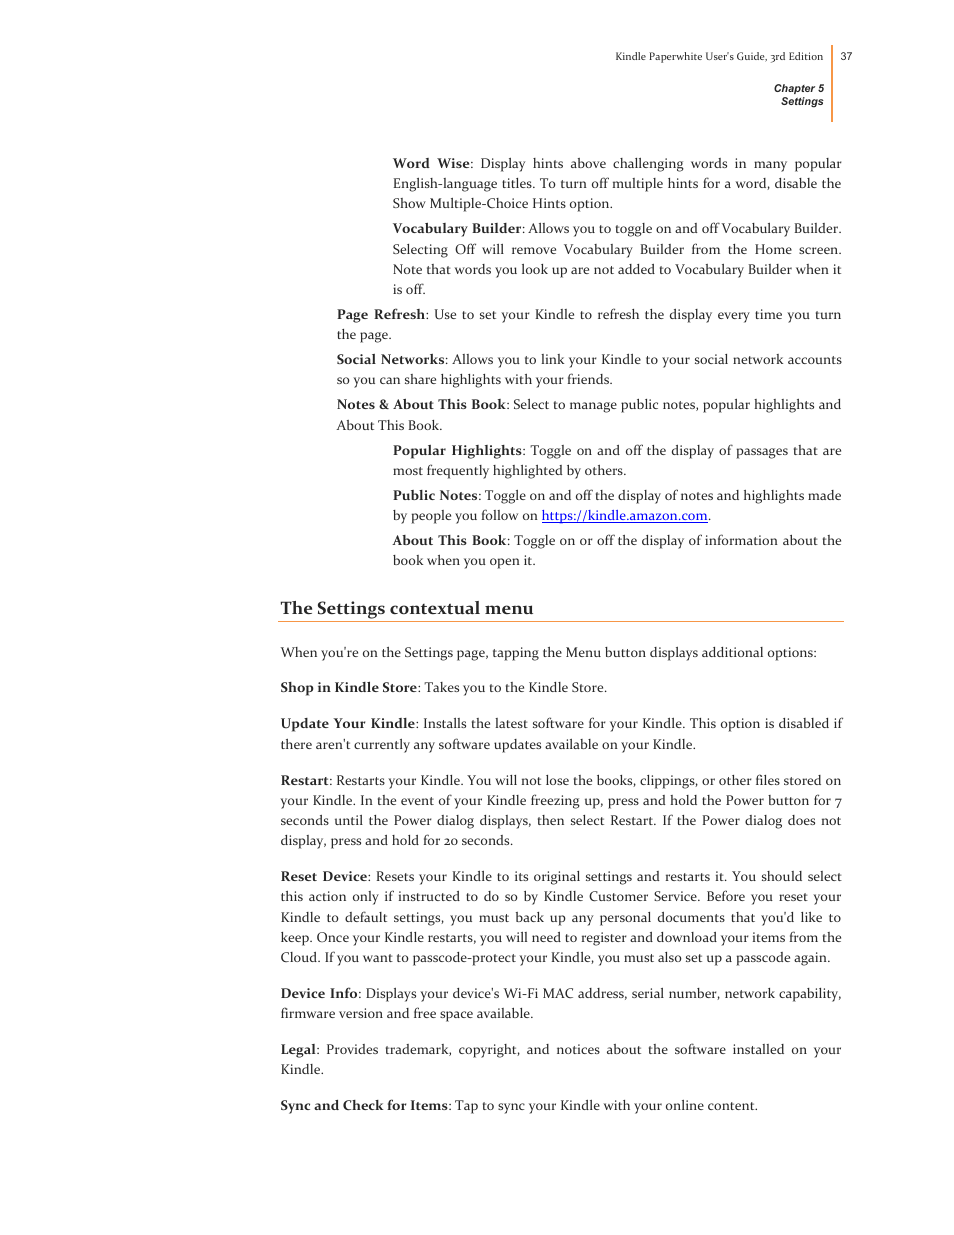 The settings contextual menu | Kindle Paperwhite (2nd Generation) User Manual | Page 37 / 47